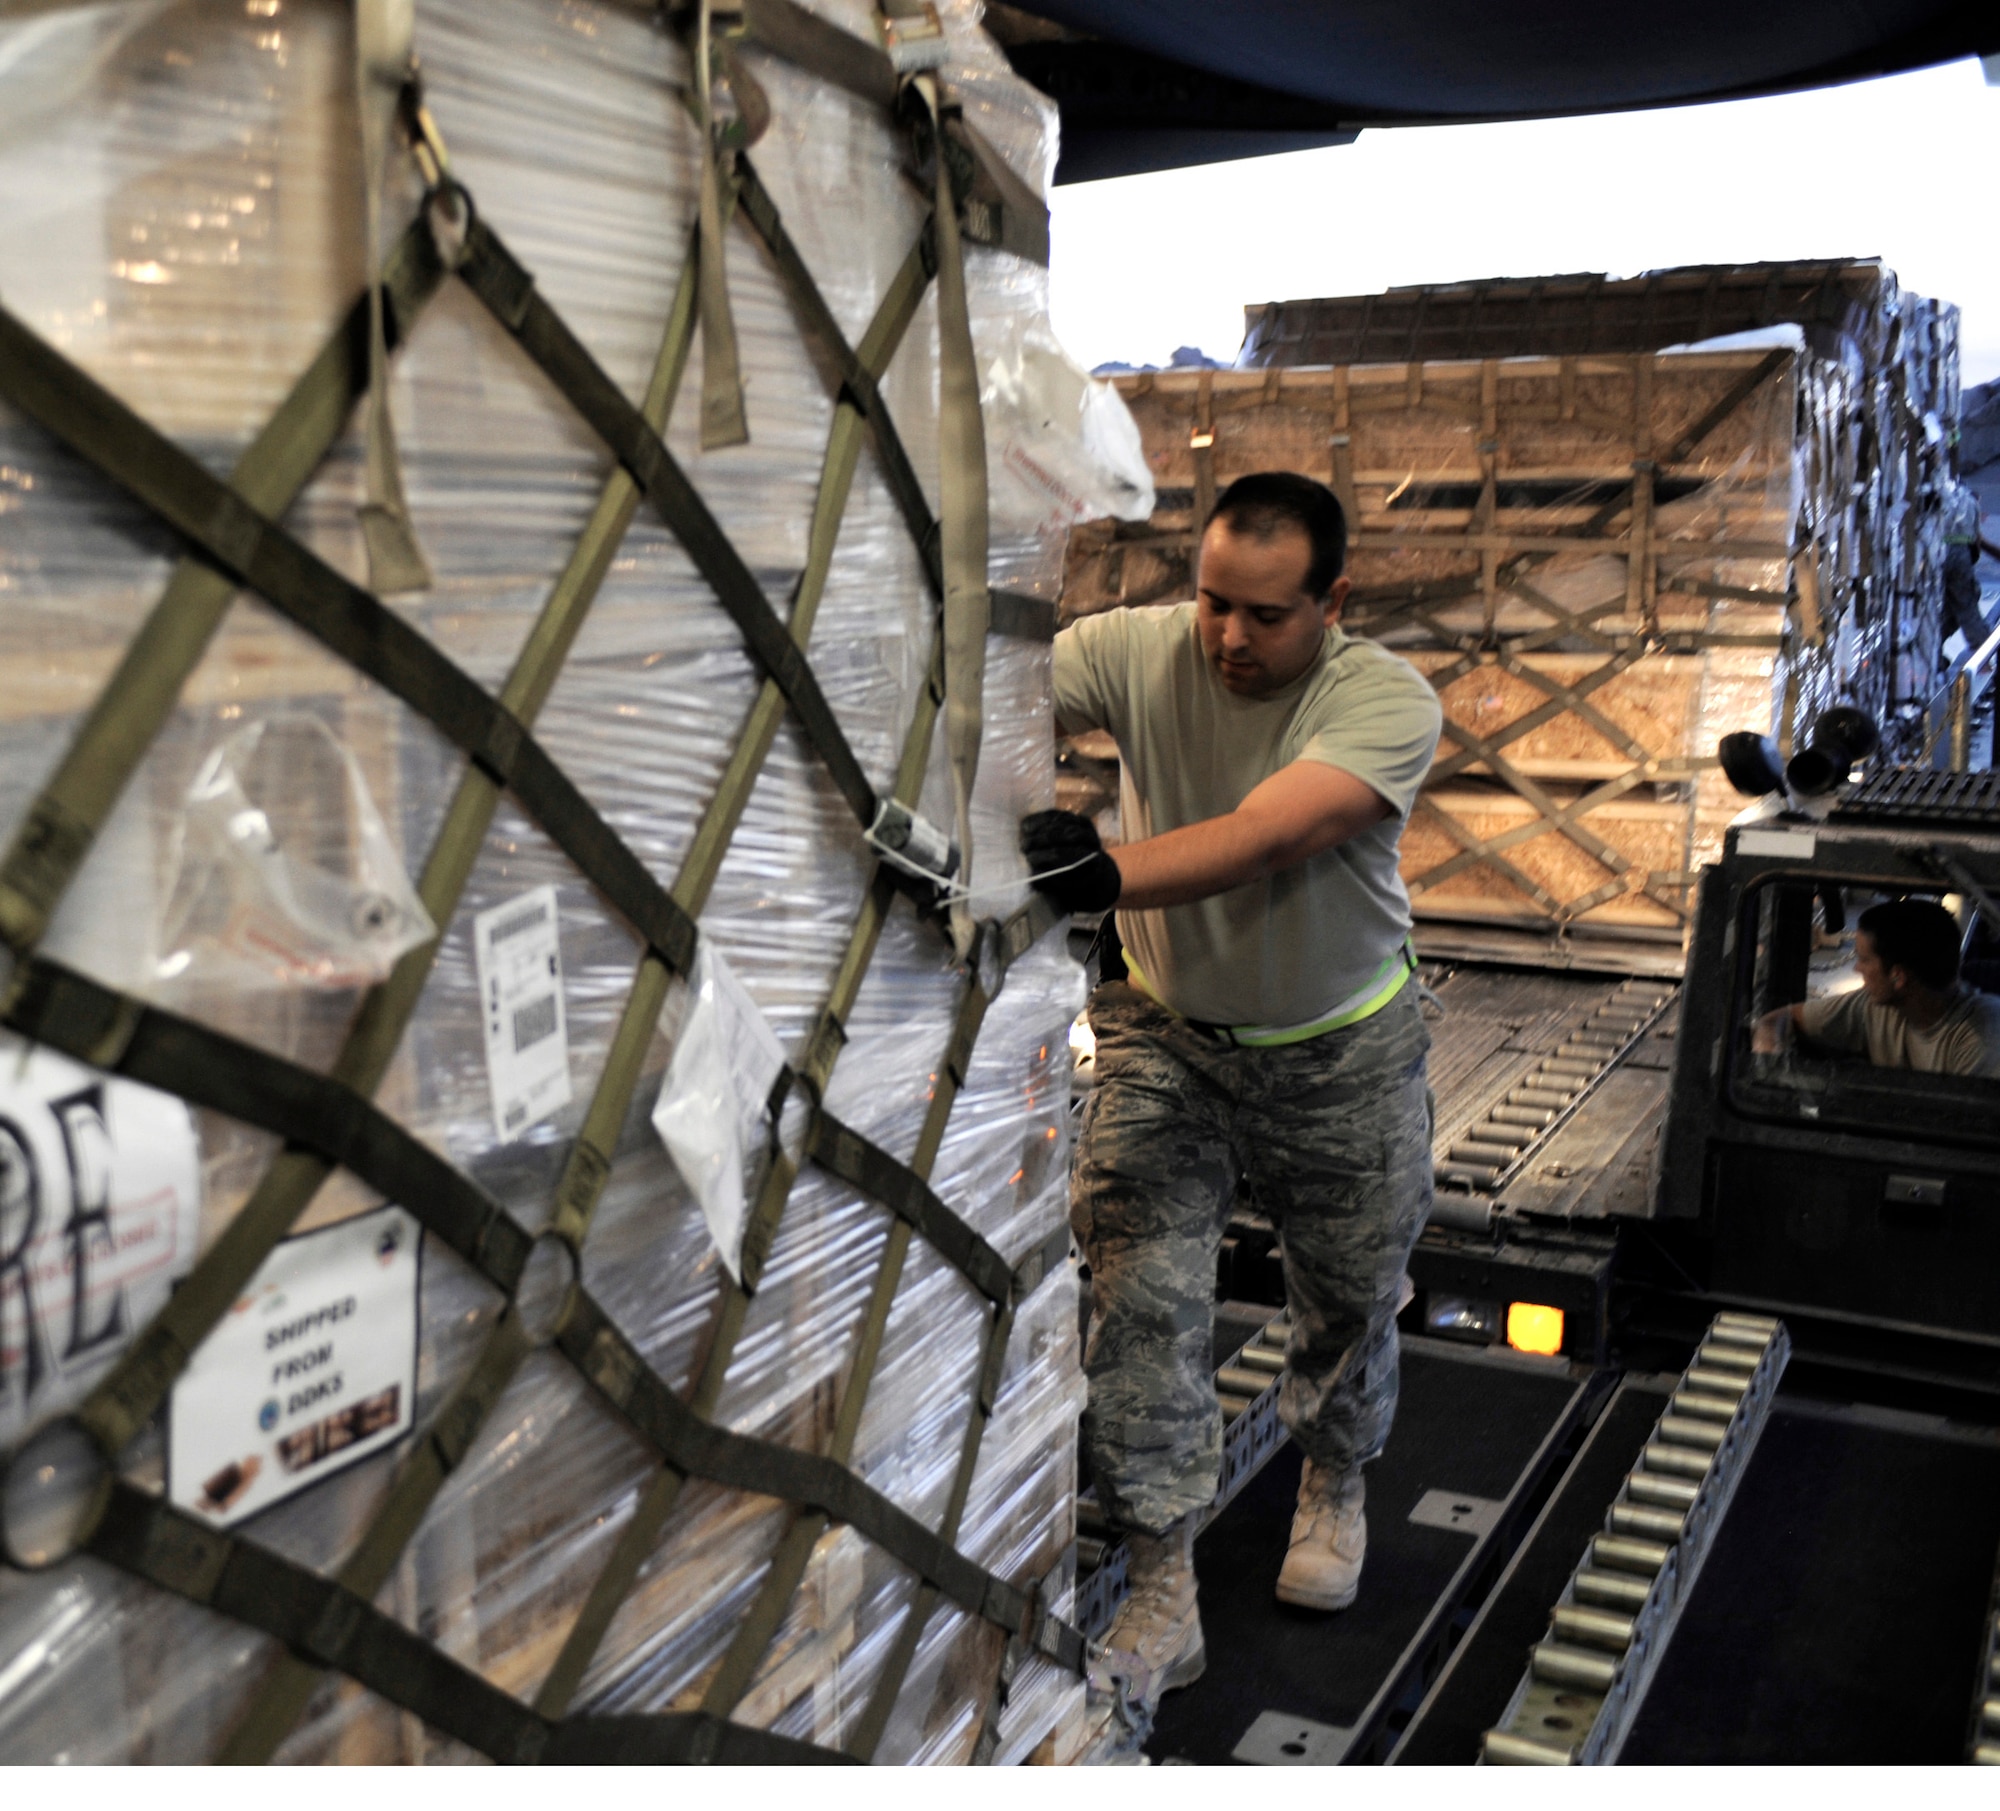 Master Sgt. Thomas J. Kondziella loads a pallet containing humanitarian relief supplies destined for Pakistan into the cargo bay of a C-17 Globemaster III May 20 at an air base in Southwest Asia. (U.S. Air Force photo/Staff Sgt. Shawn Weismiller)